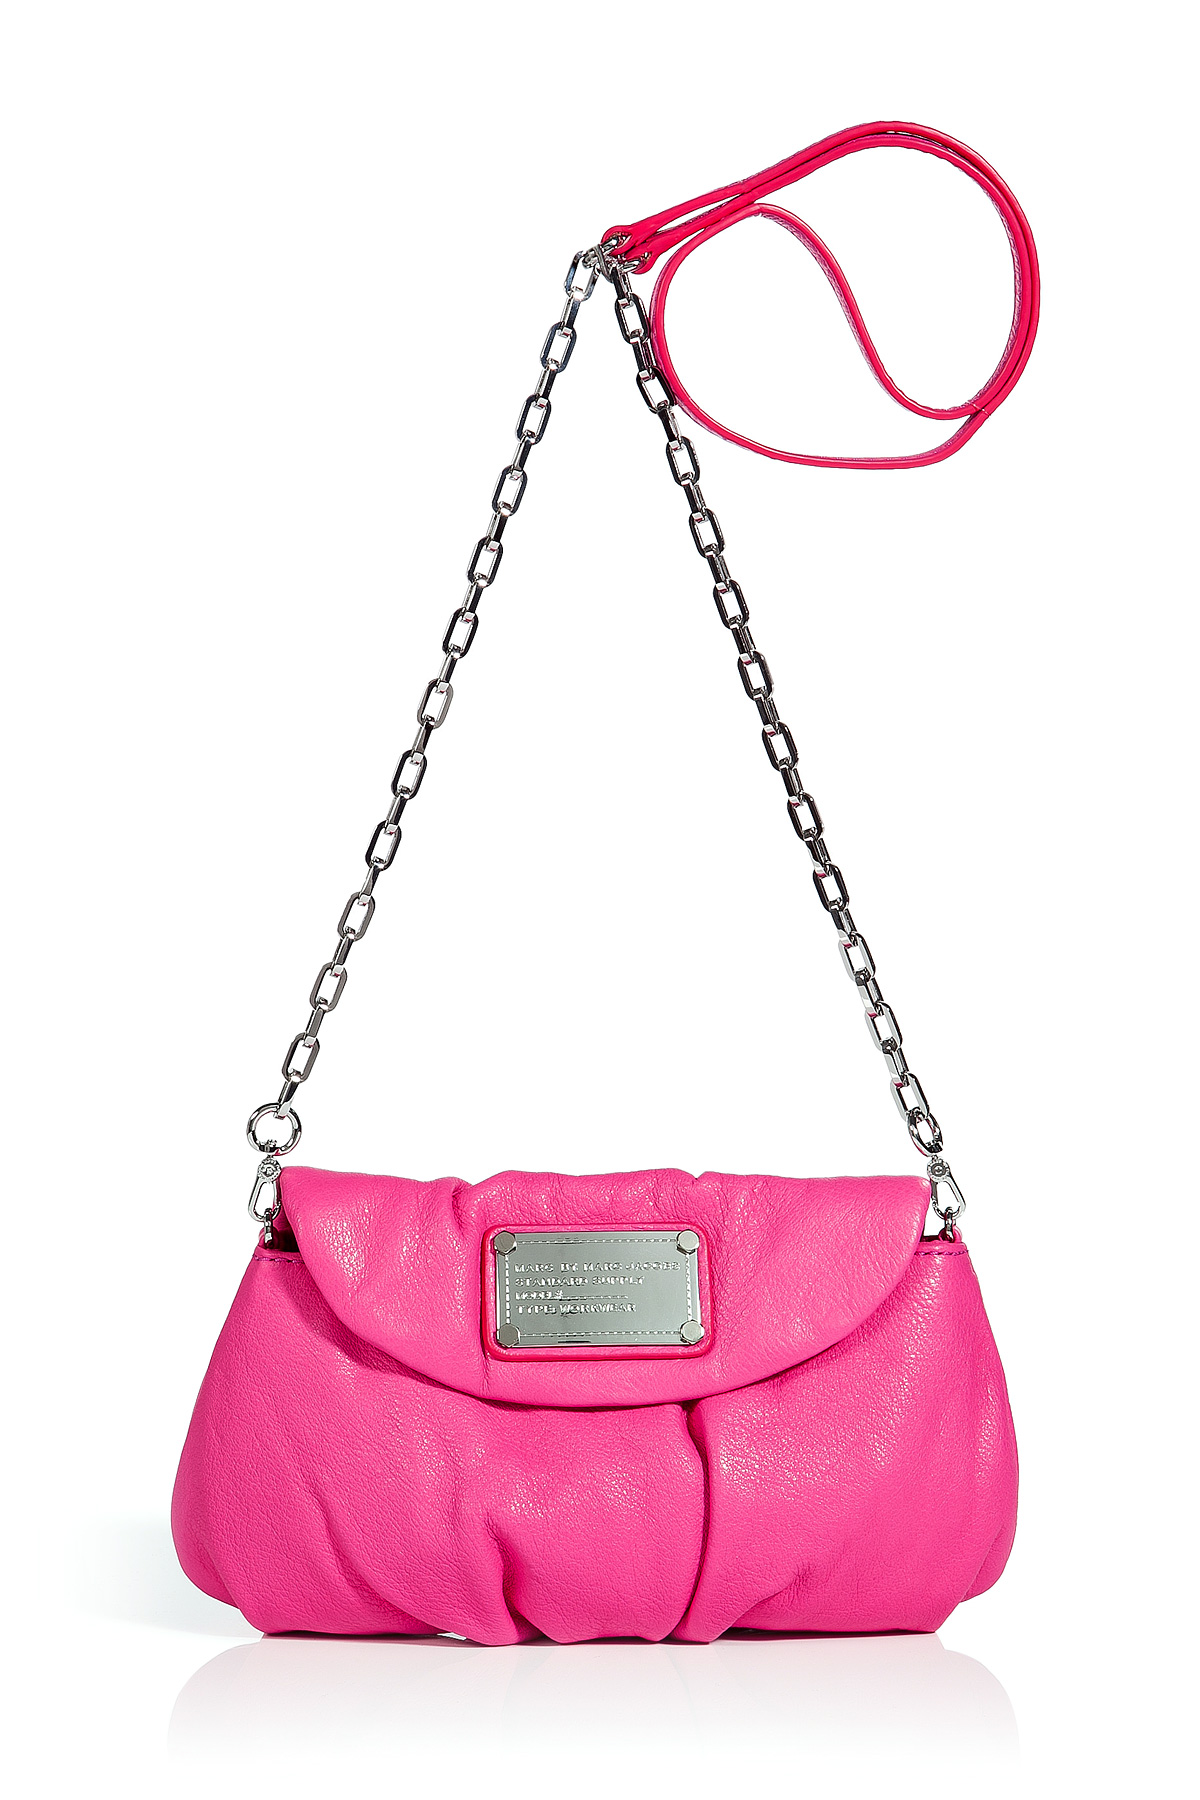 Marc By Marc Jacobs Pink Blossom Classic Q Karlie Crossbody Bag in Pink | Lyst